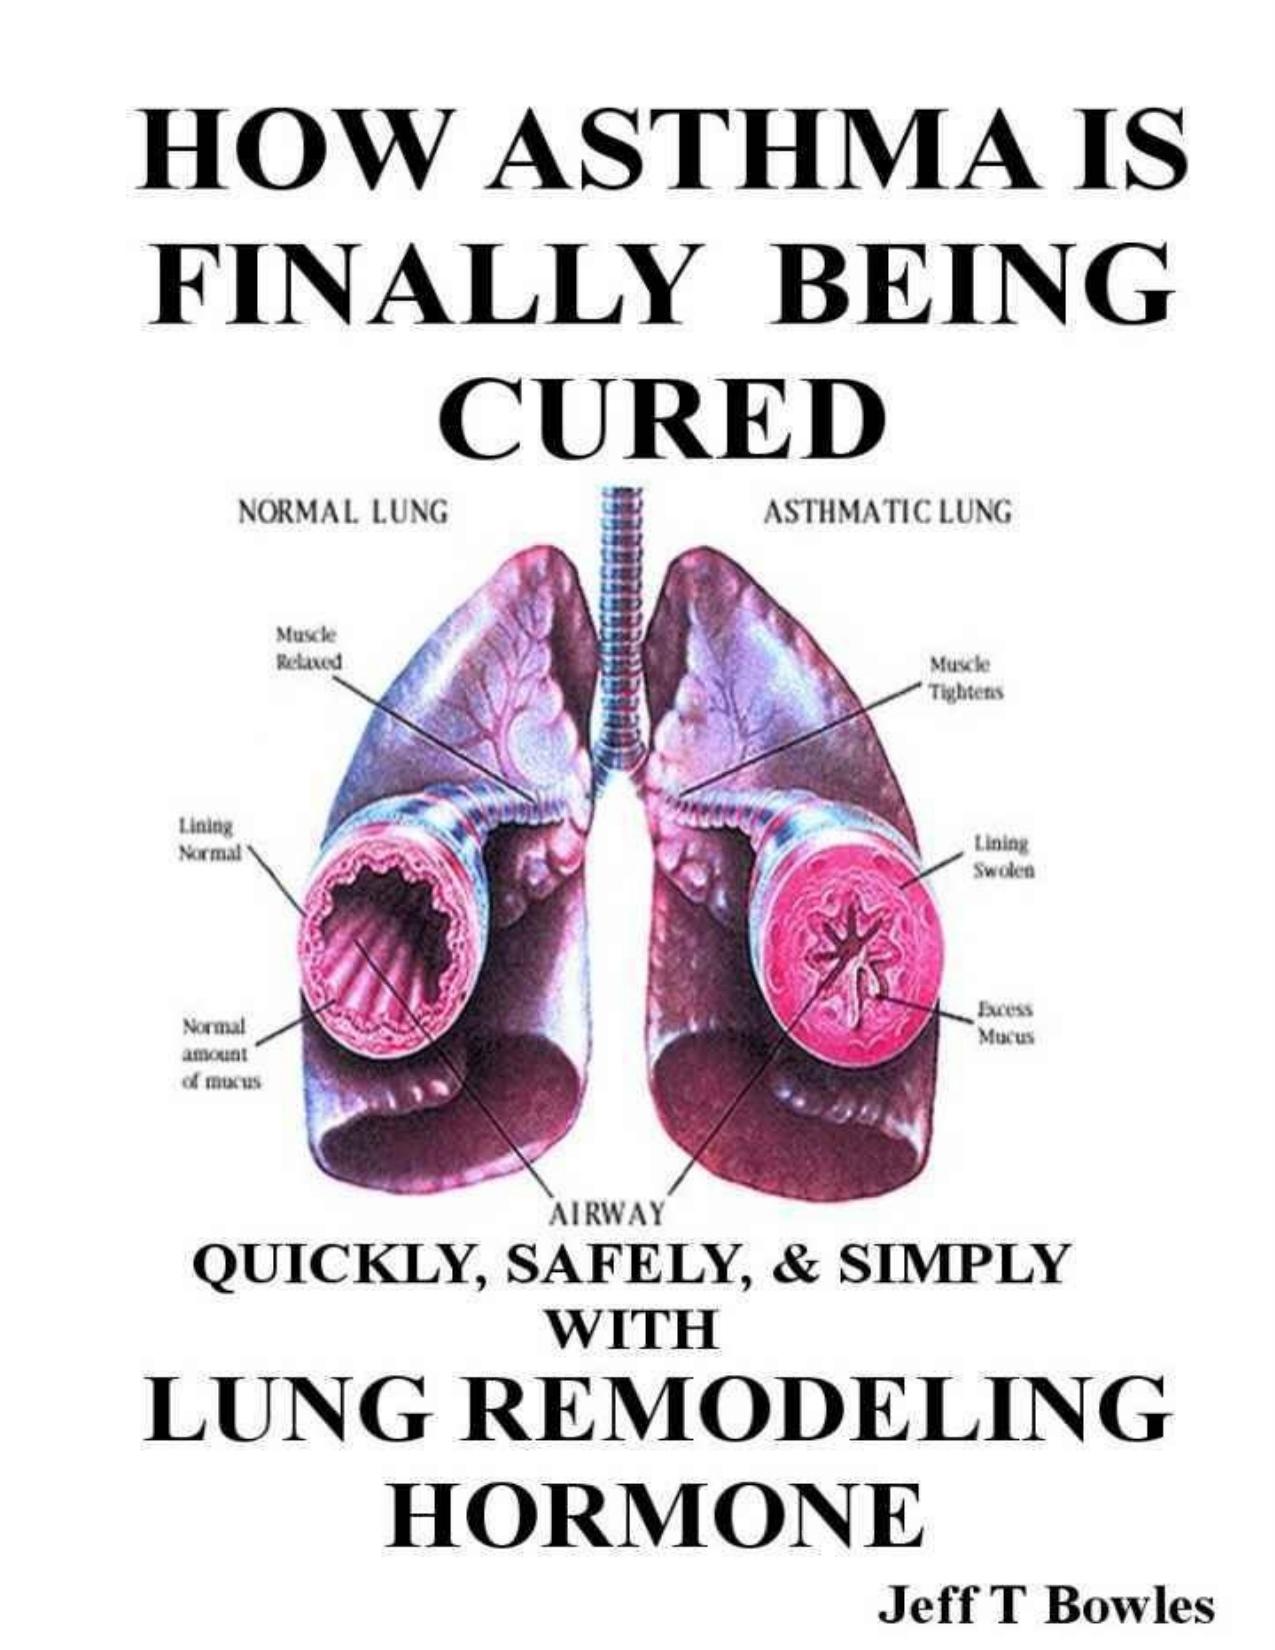 How Asthma Is Finally Being Cured-Quickly, Simply, & Safely With Human Lung Remodeling Hormone